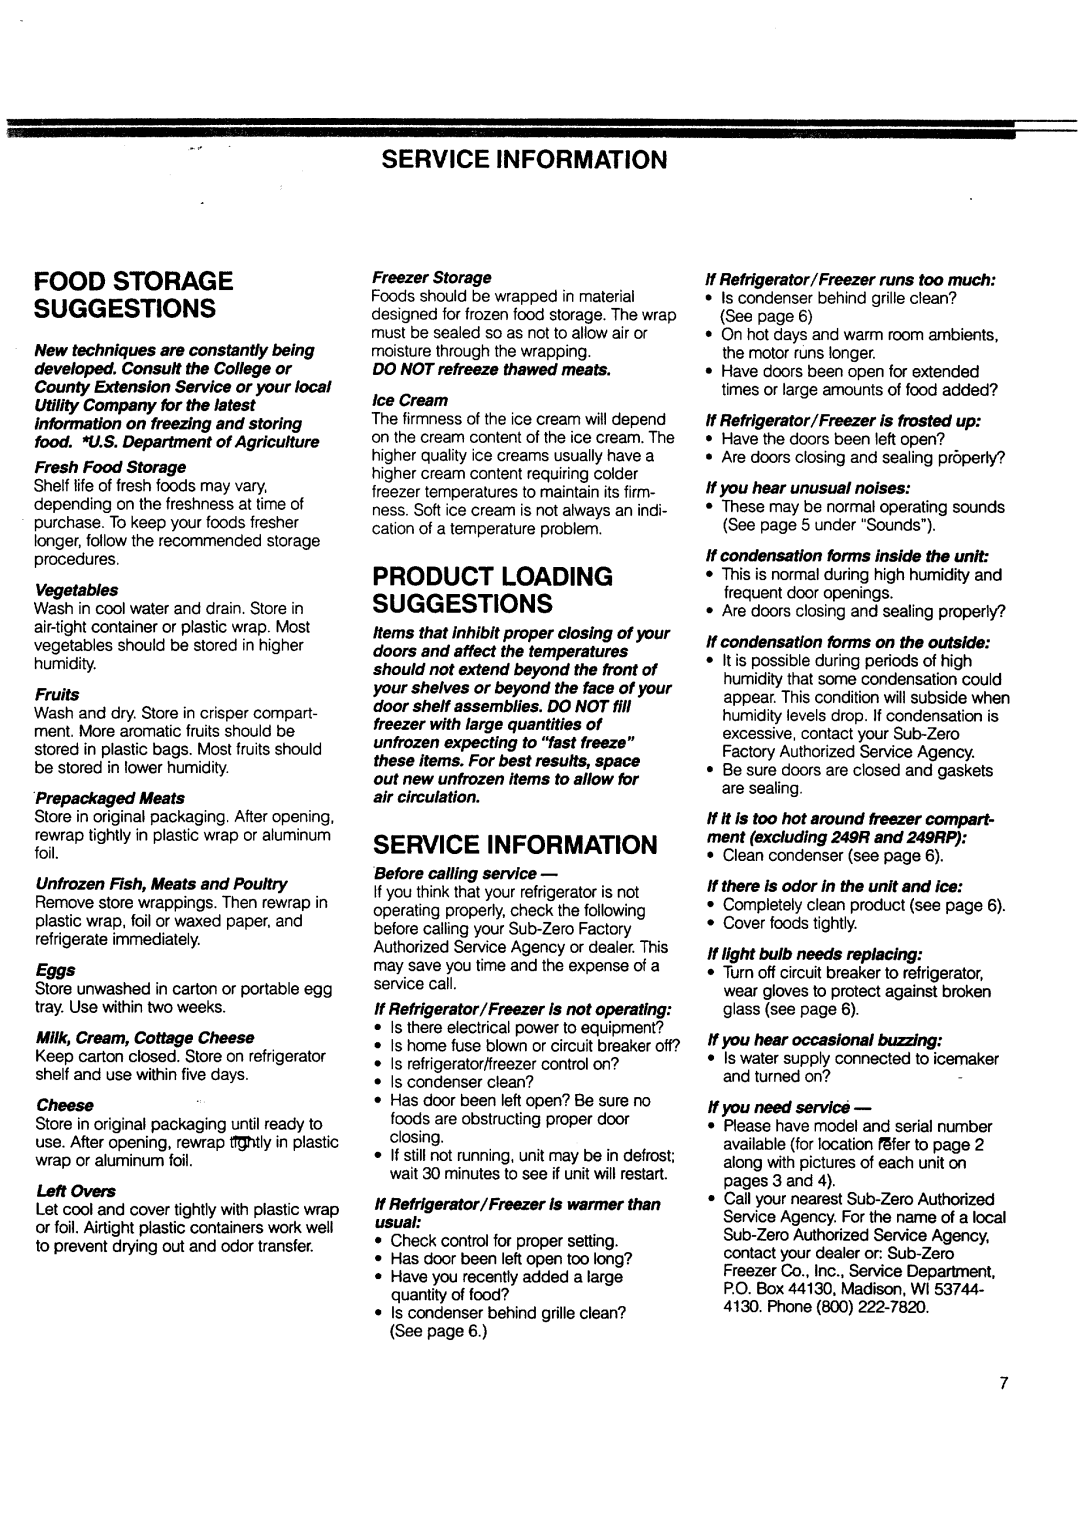 Sears 245 Service Information, Product Loading Suggestions, Food Storage Suggestions, Unfrozen Fish, Meats and Poultry 